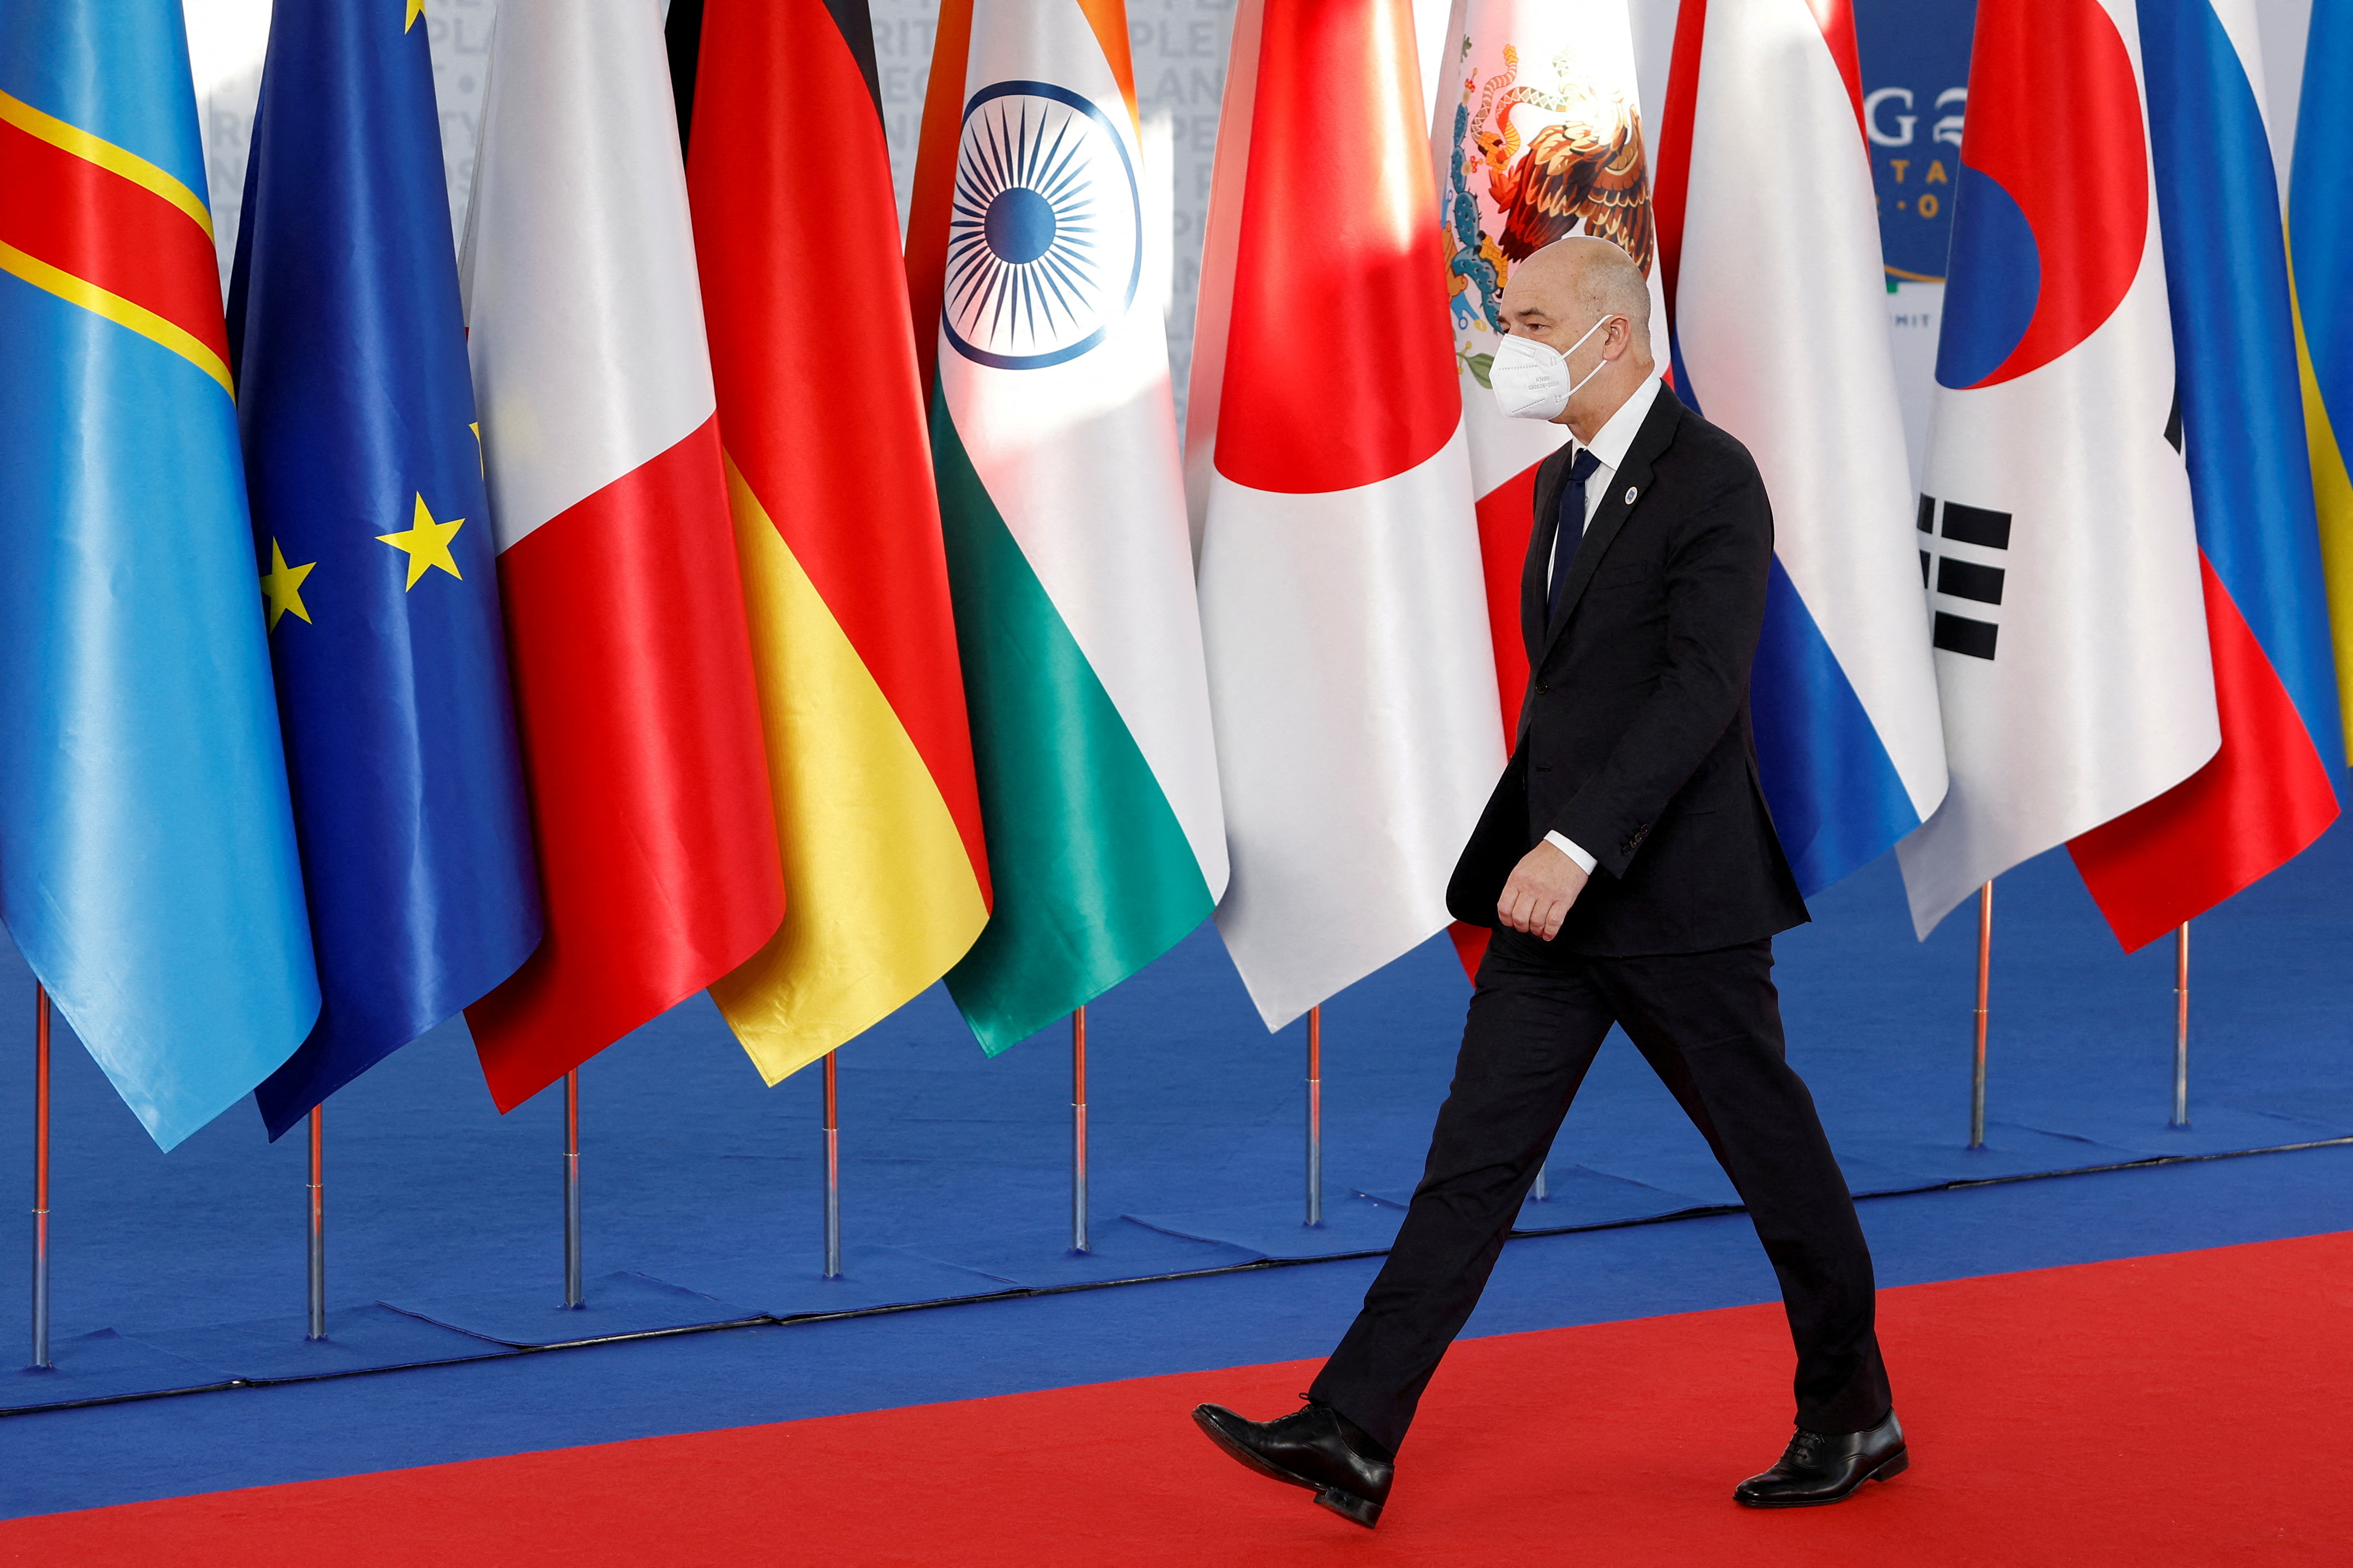 File photo of Siluano at the G20 conference in Rome last October (REUTERS / Guglielmo Mangiapane // File Photo)